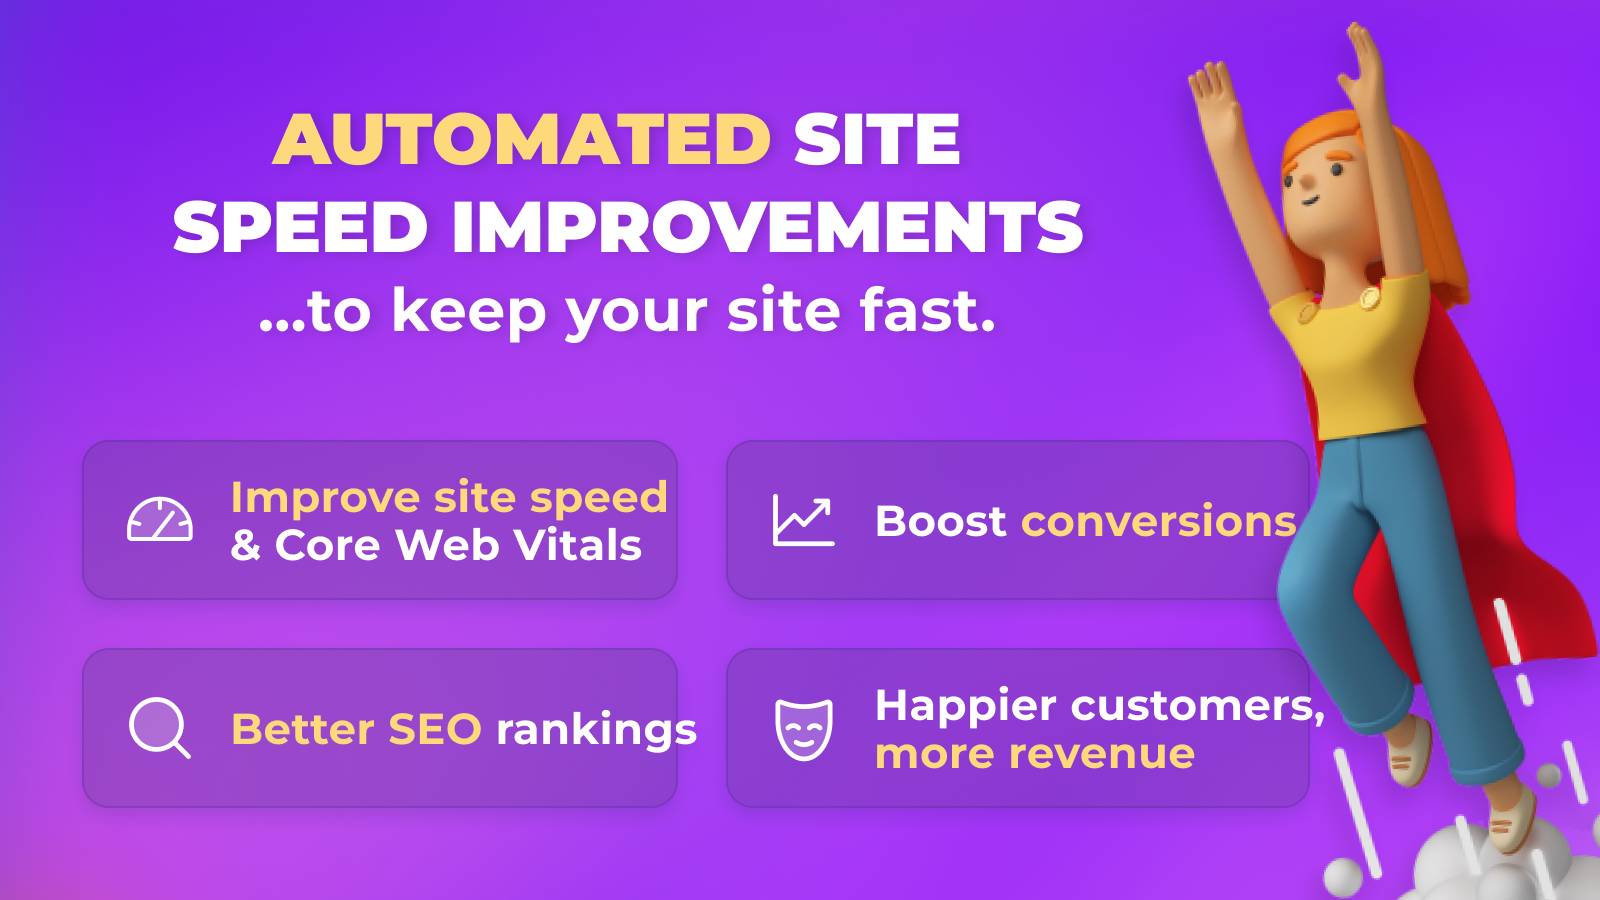 Automated site speed improvements